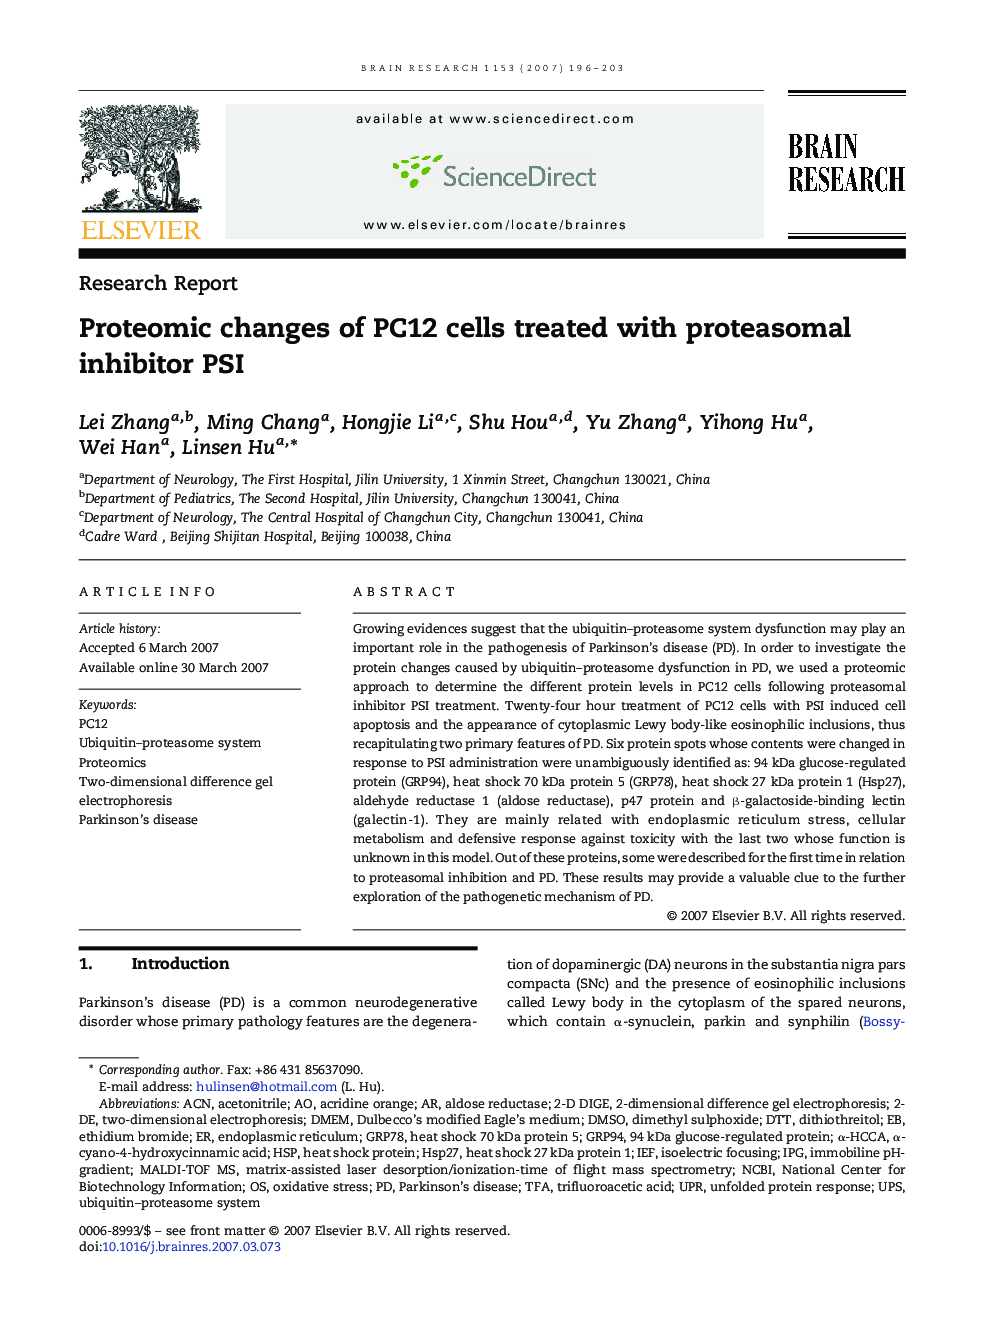 Proteomic changes of PC12 cells treated with proteasomal inhibitor PSI